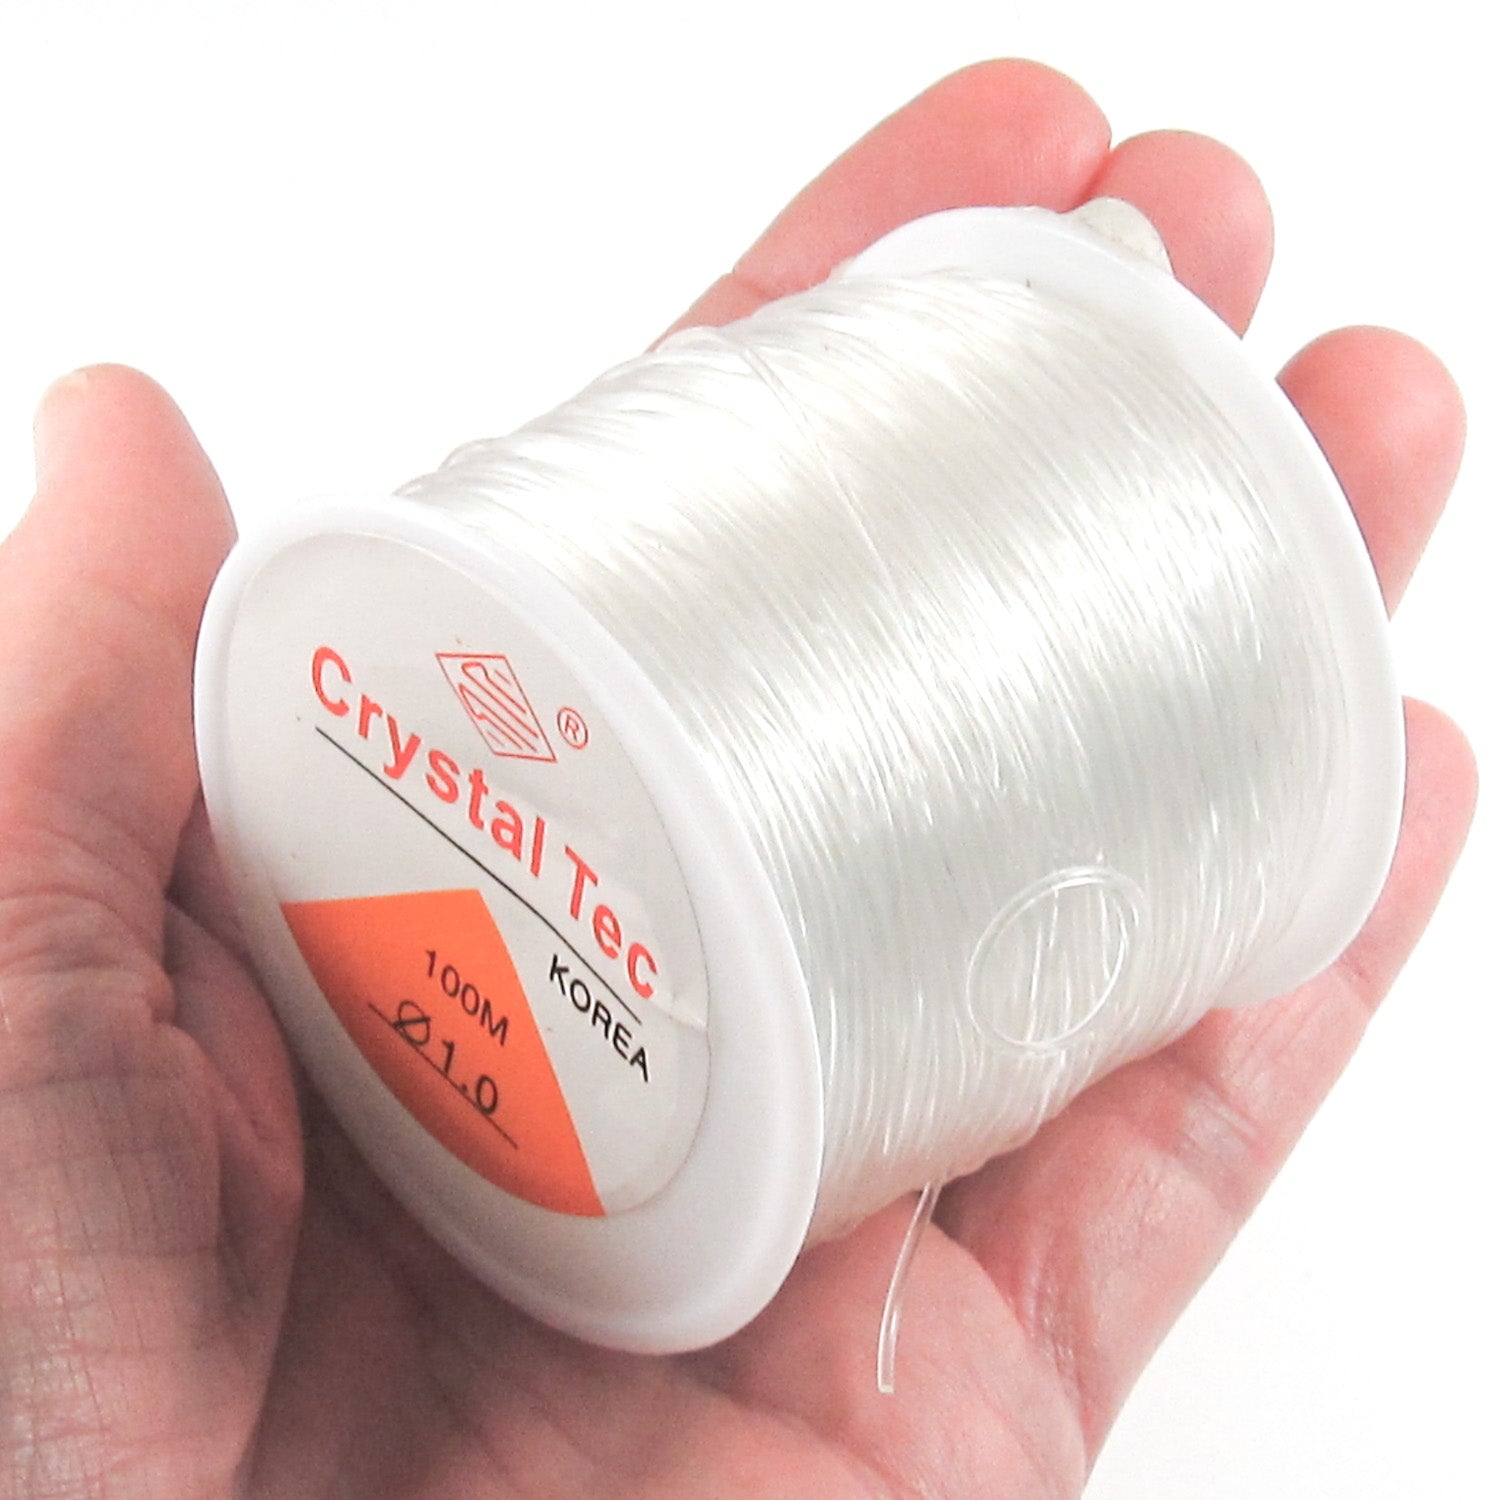 CCINEE 1mm Elastic Stretch Transparent String Cord for Jewelry Making Bracelet Beading Thread 100m/roll